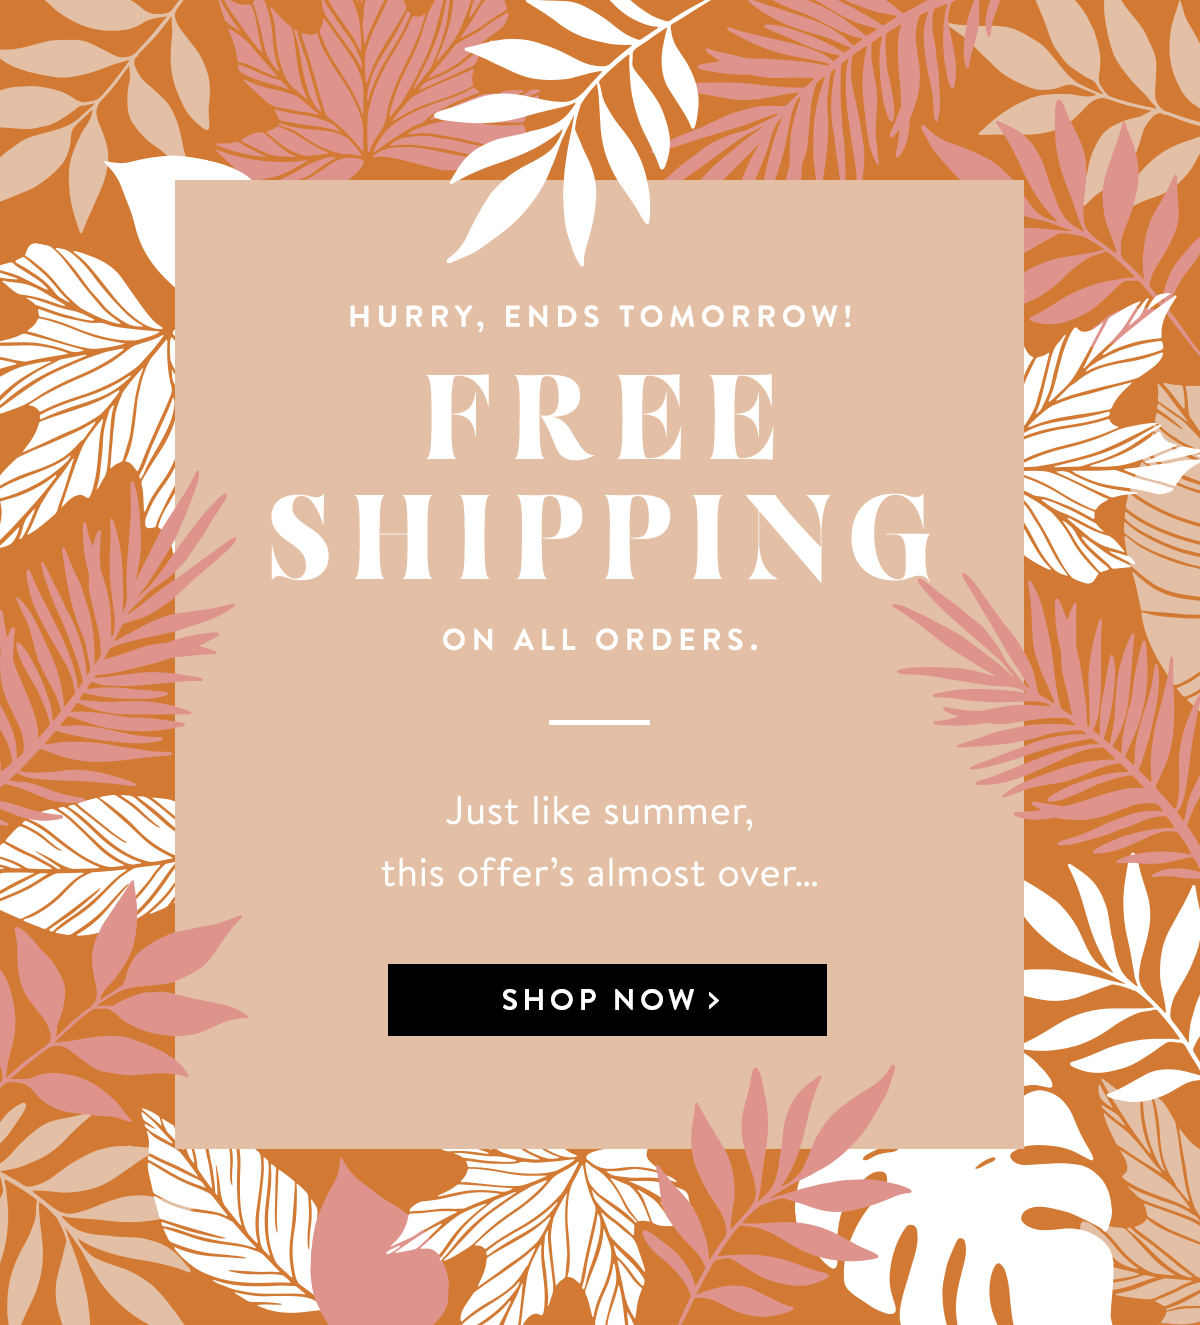 Free Shipping Ends Tomorrow | Shop Now